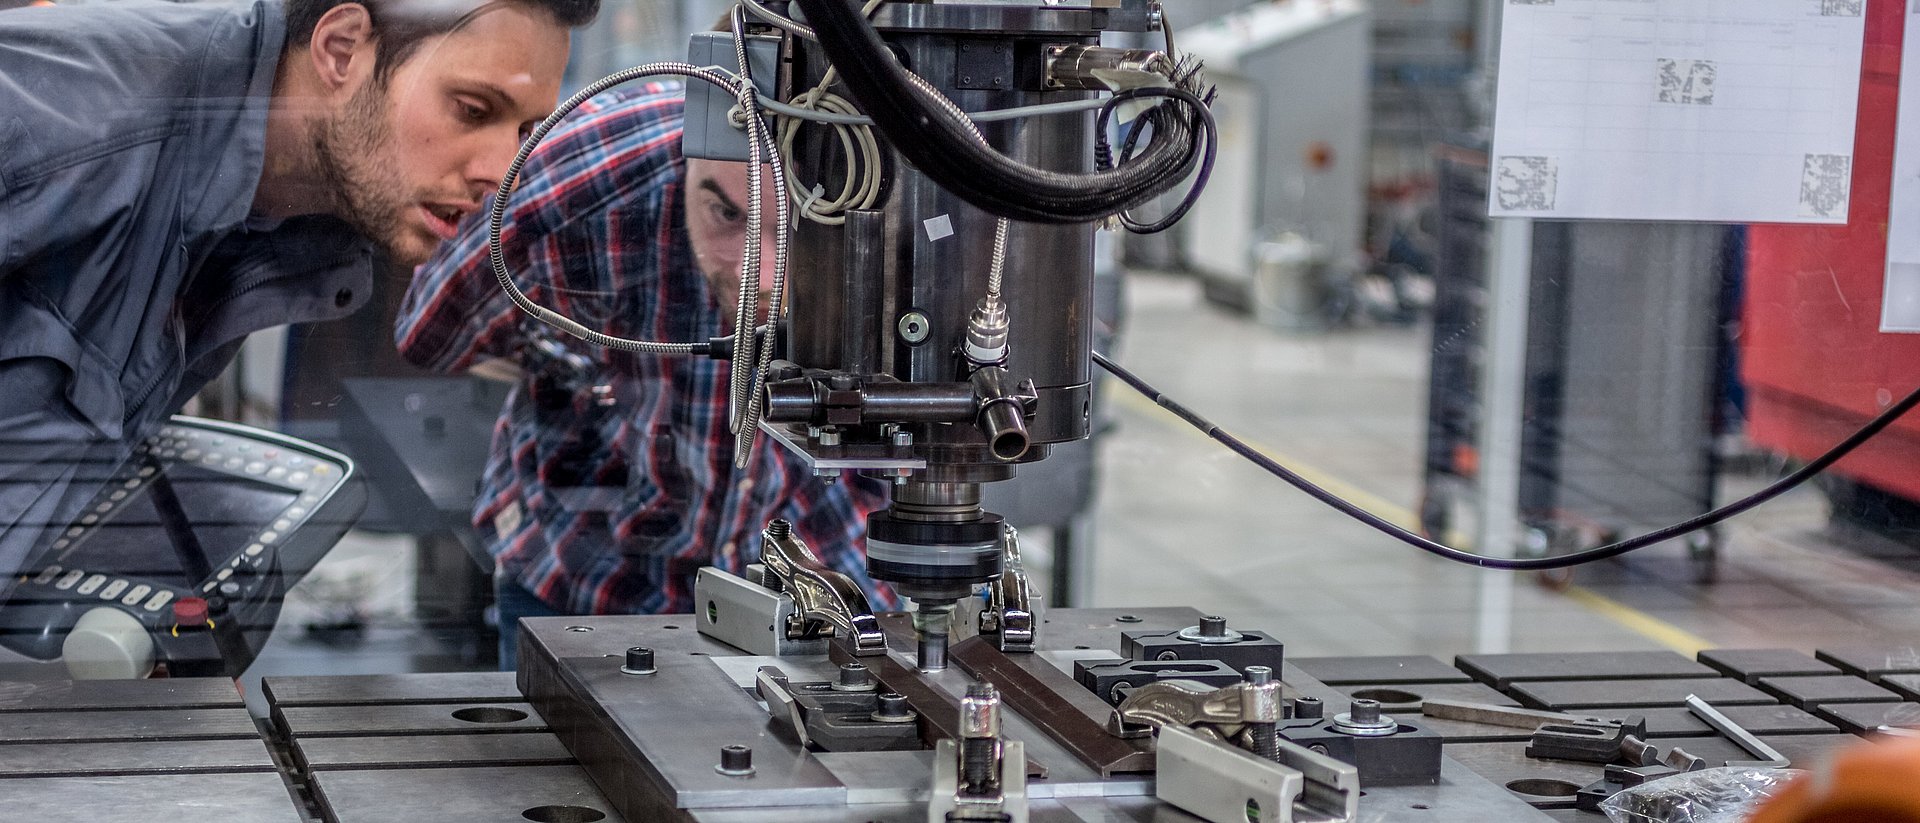 Dr. Andreas Bachmann (left) watches through a safety glass as the robot welds two metal plates together with the rapidly rotating welding pin.